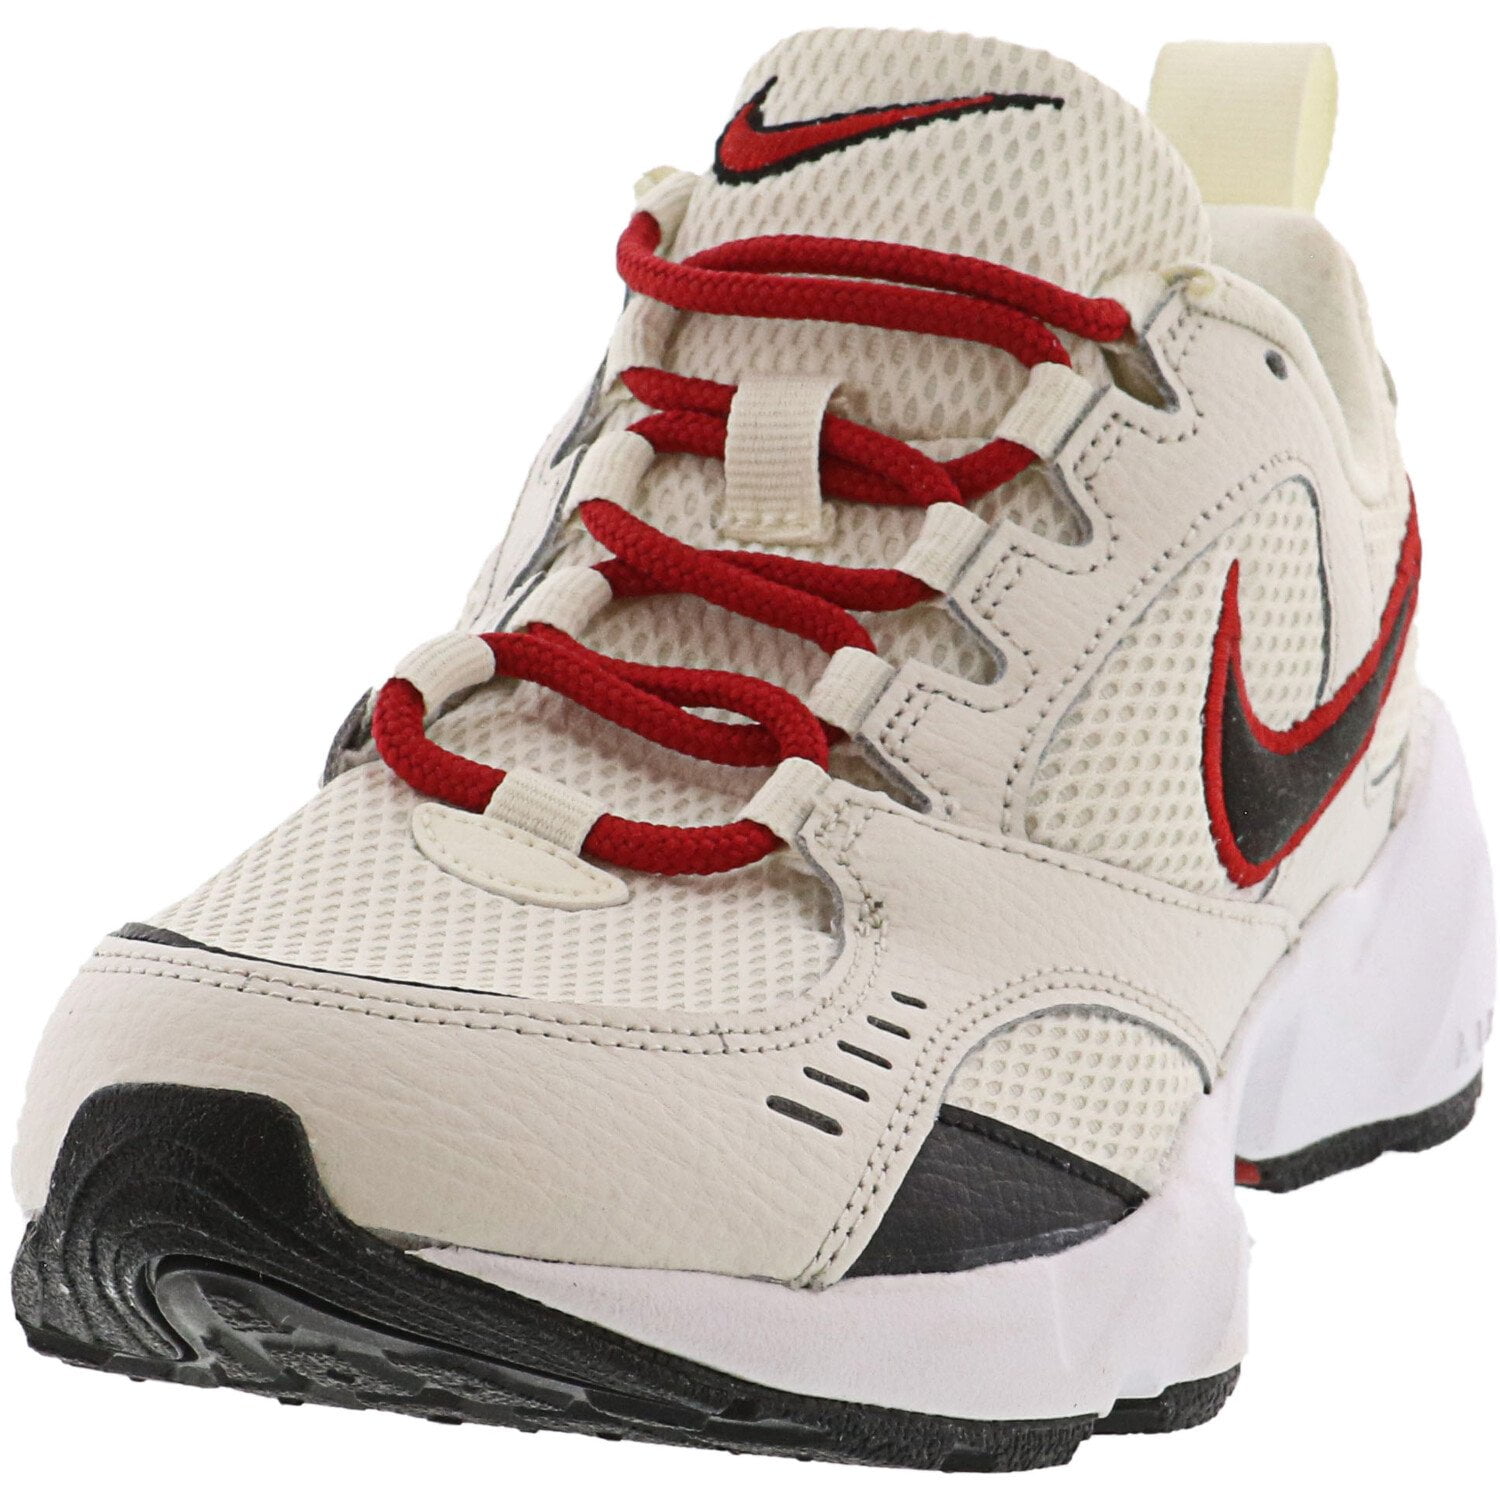 are nike air heights good for running